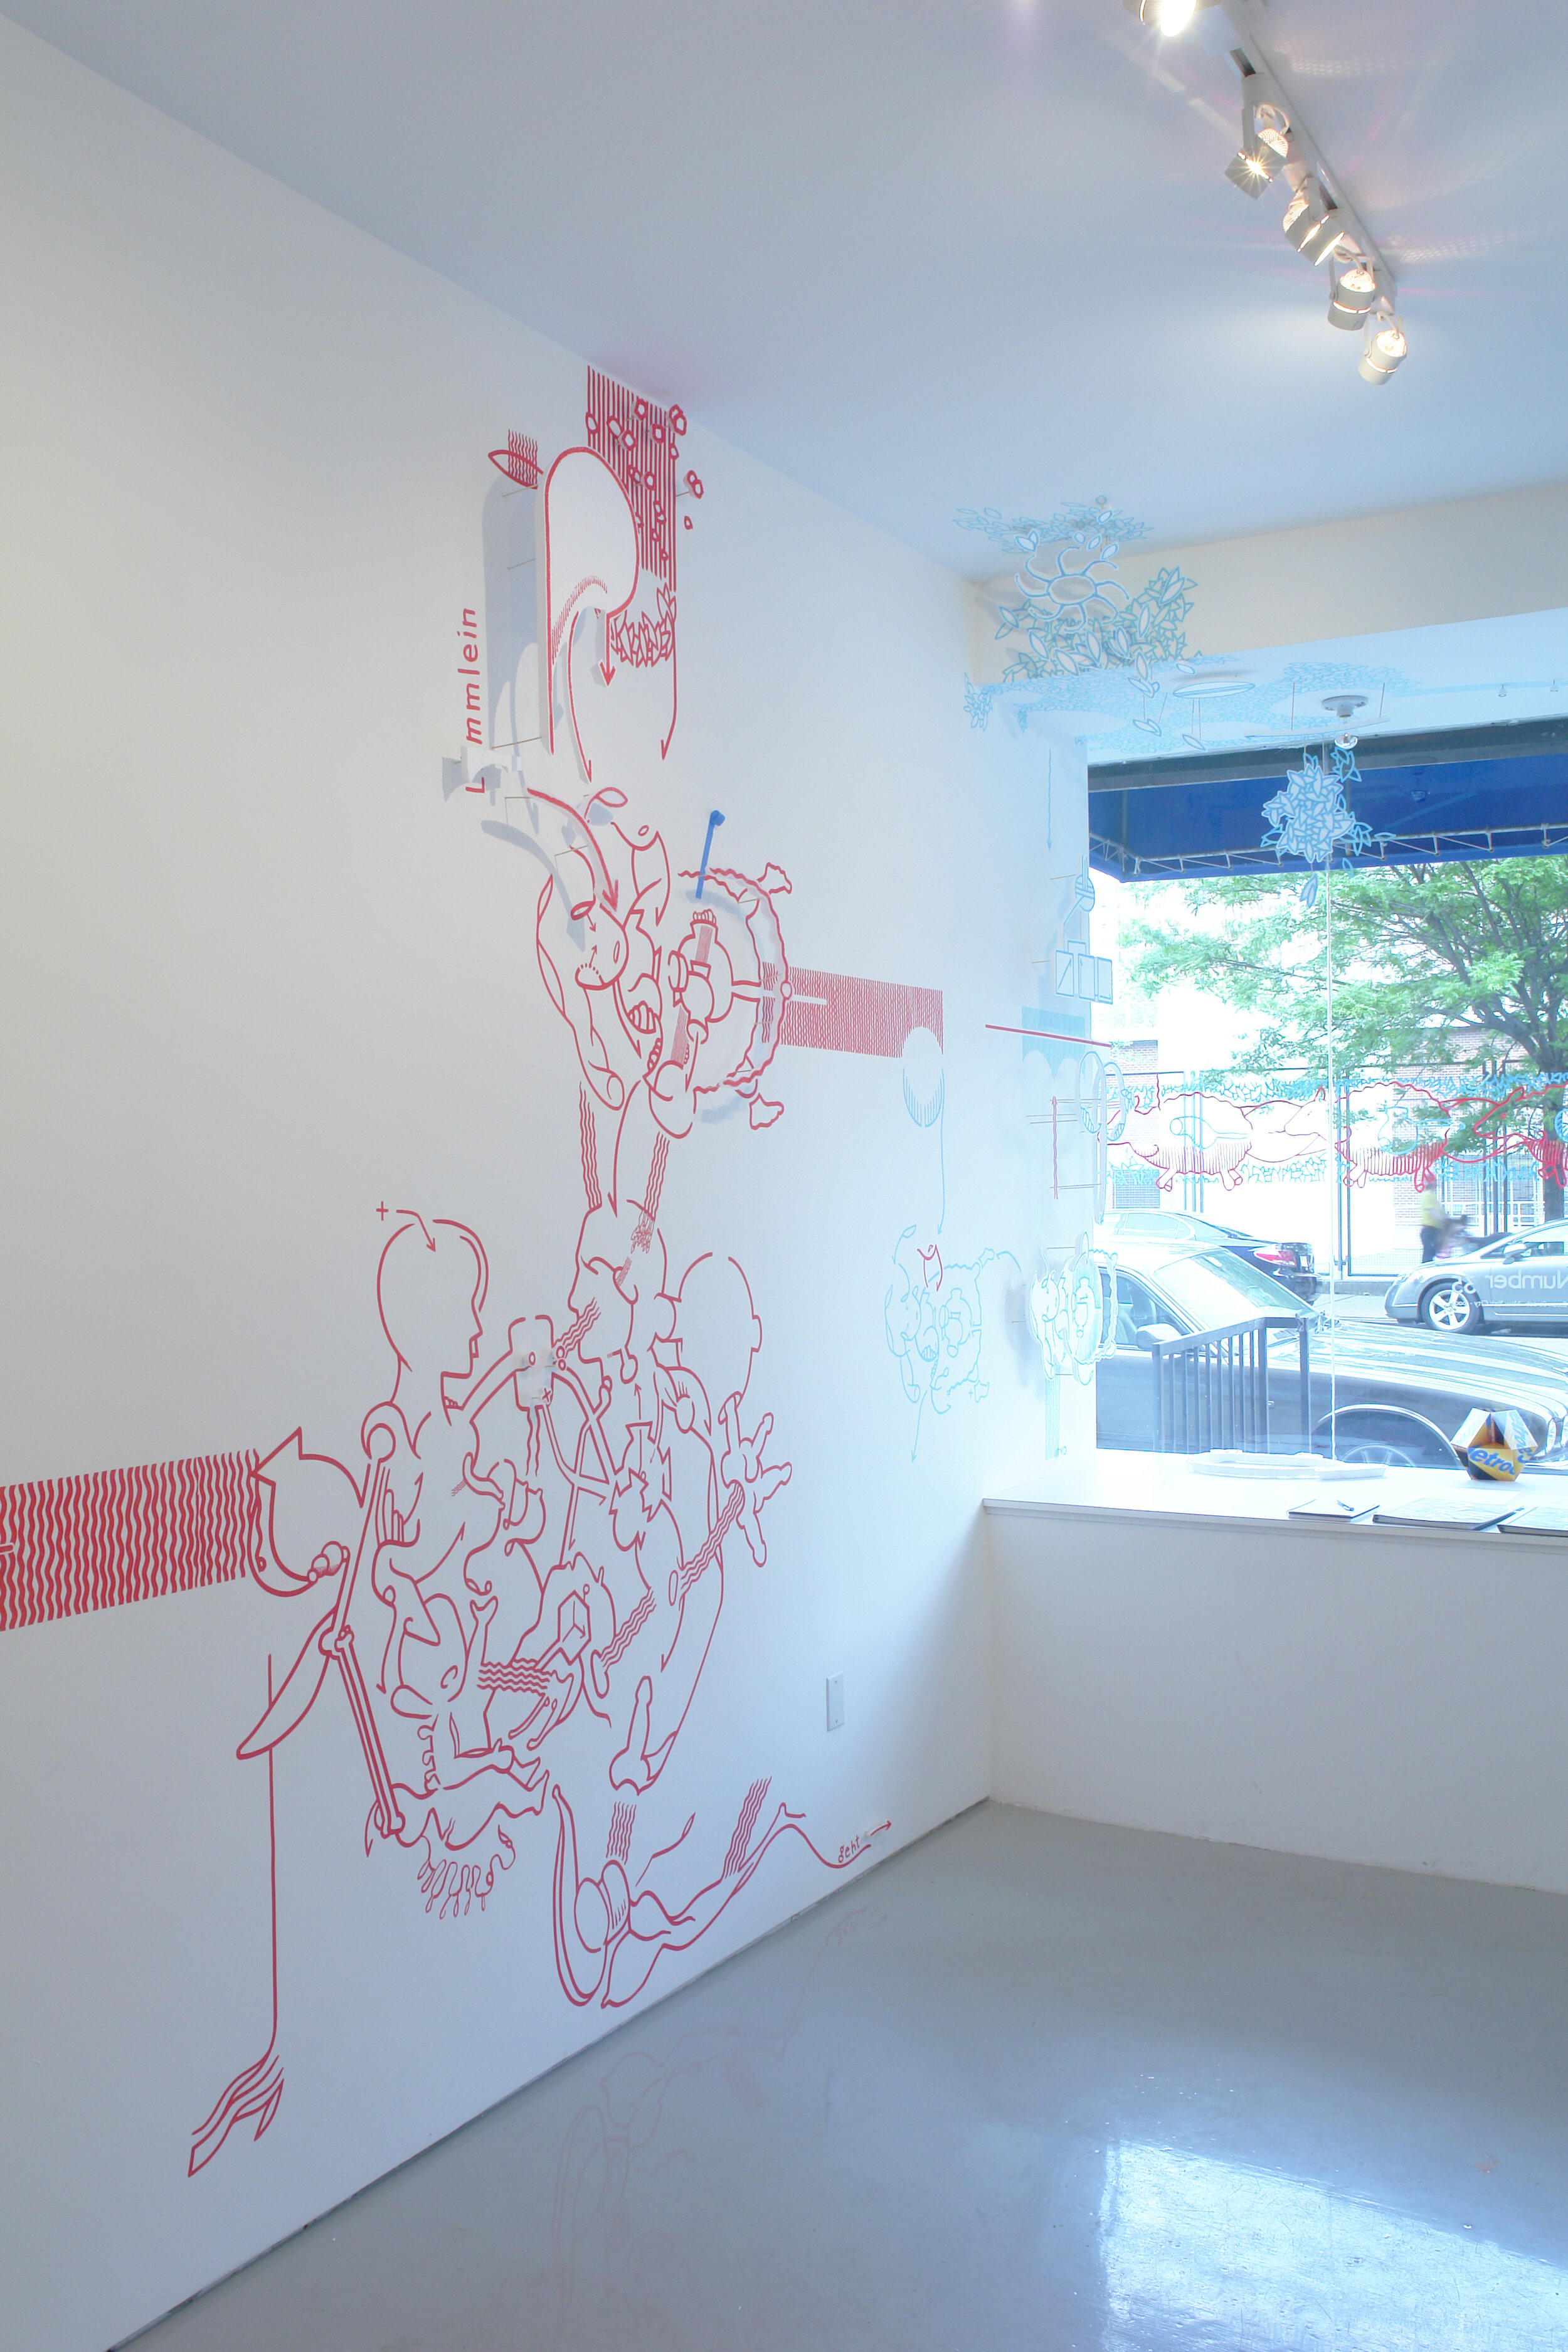 Installation image from the 2008 Hannes Kater exhibition, Right Drawings in Wrong Settings, at Cindy Rucker Gallery, Number 35